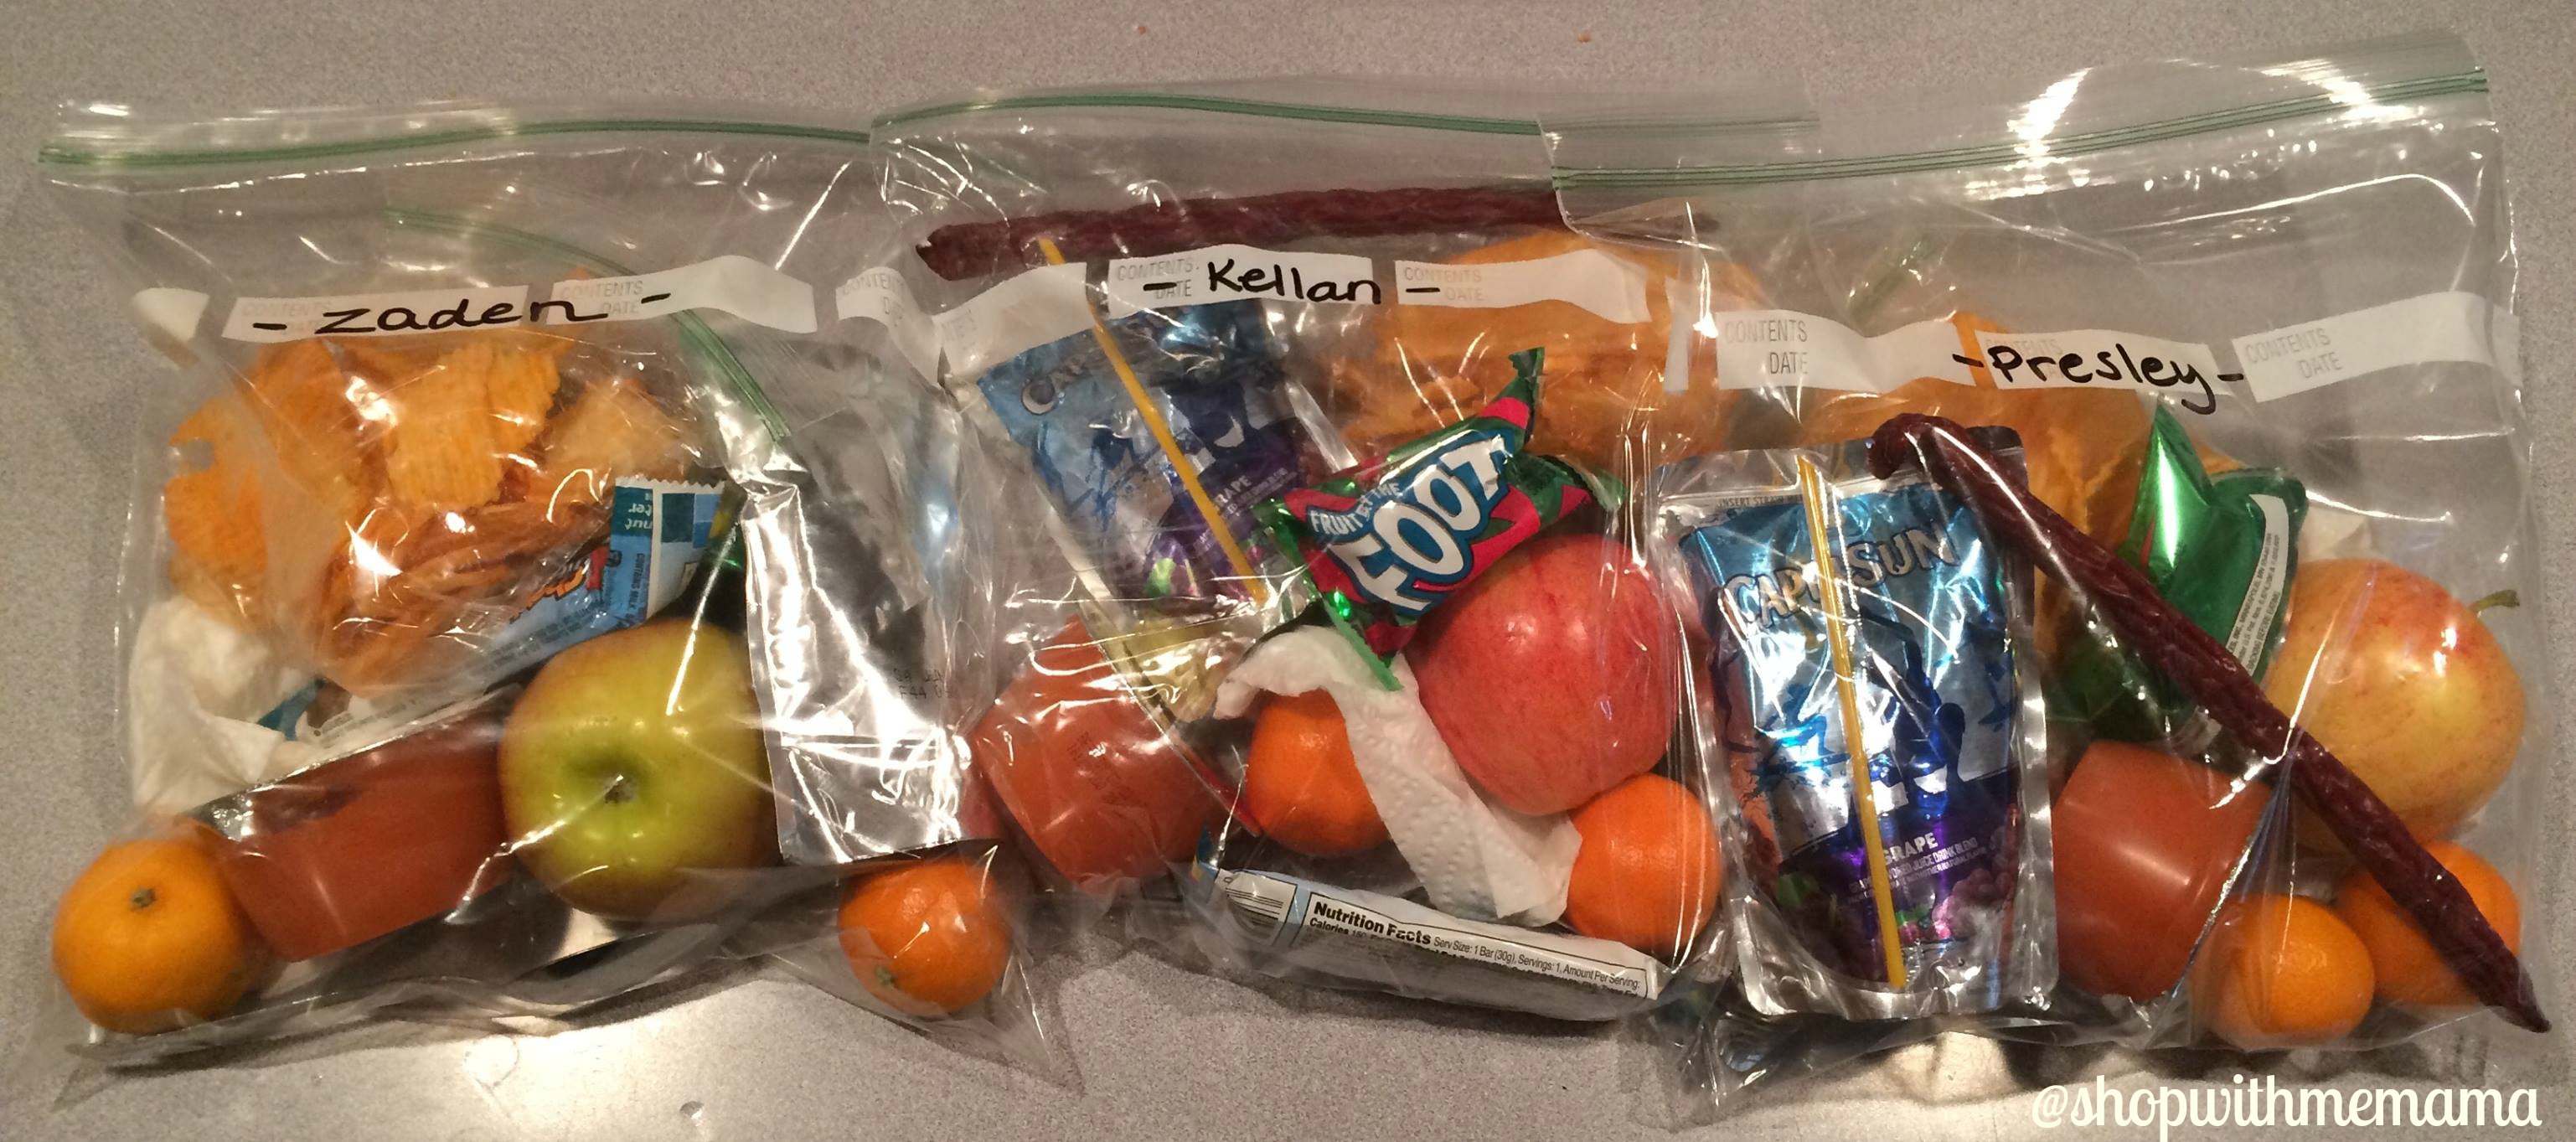 Snack bags for kids going on a road trip